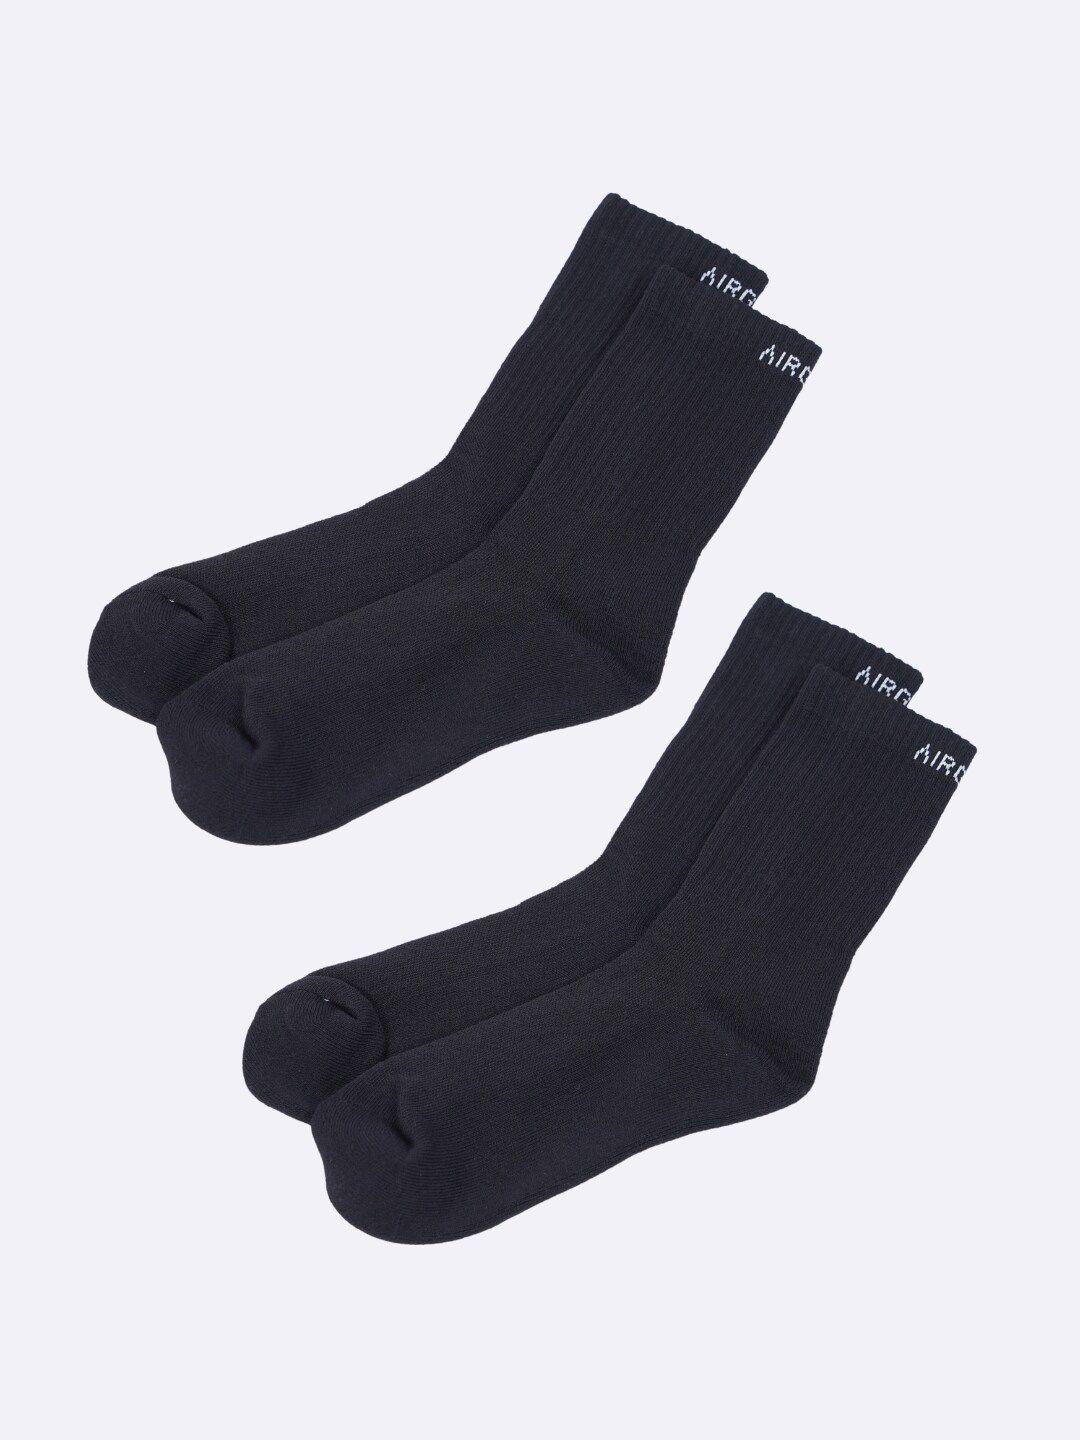 air-garb-unisex-pack-of-2-breathable-cushioned-calf-length-socks